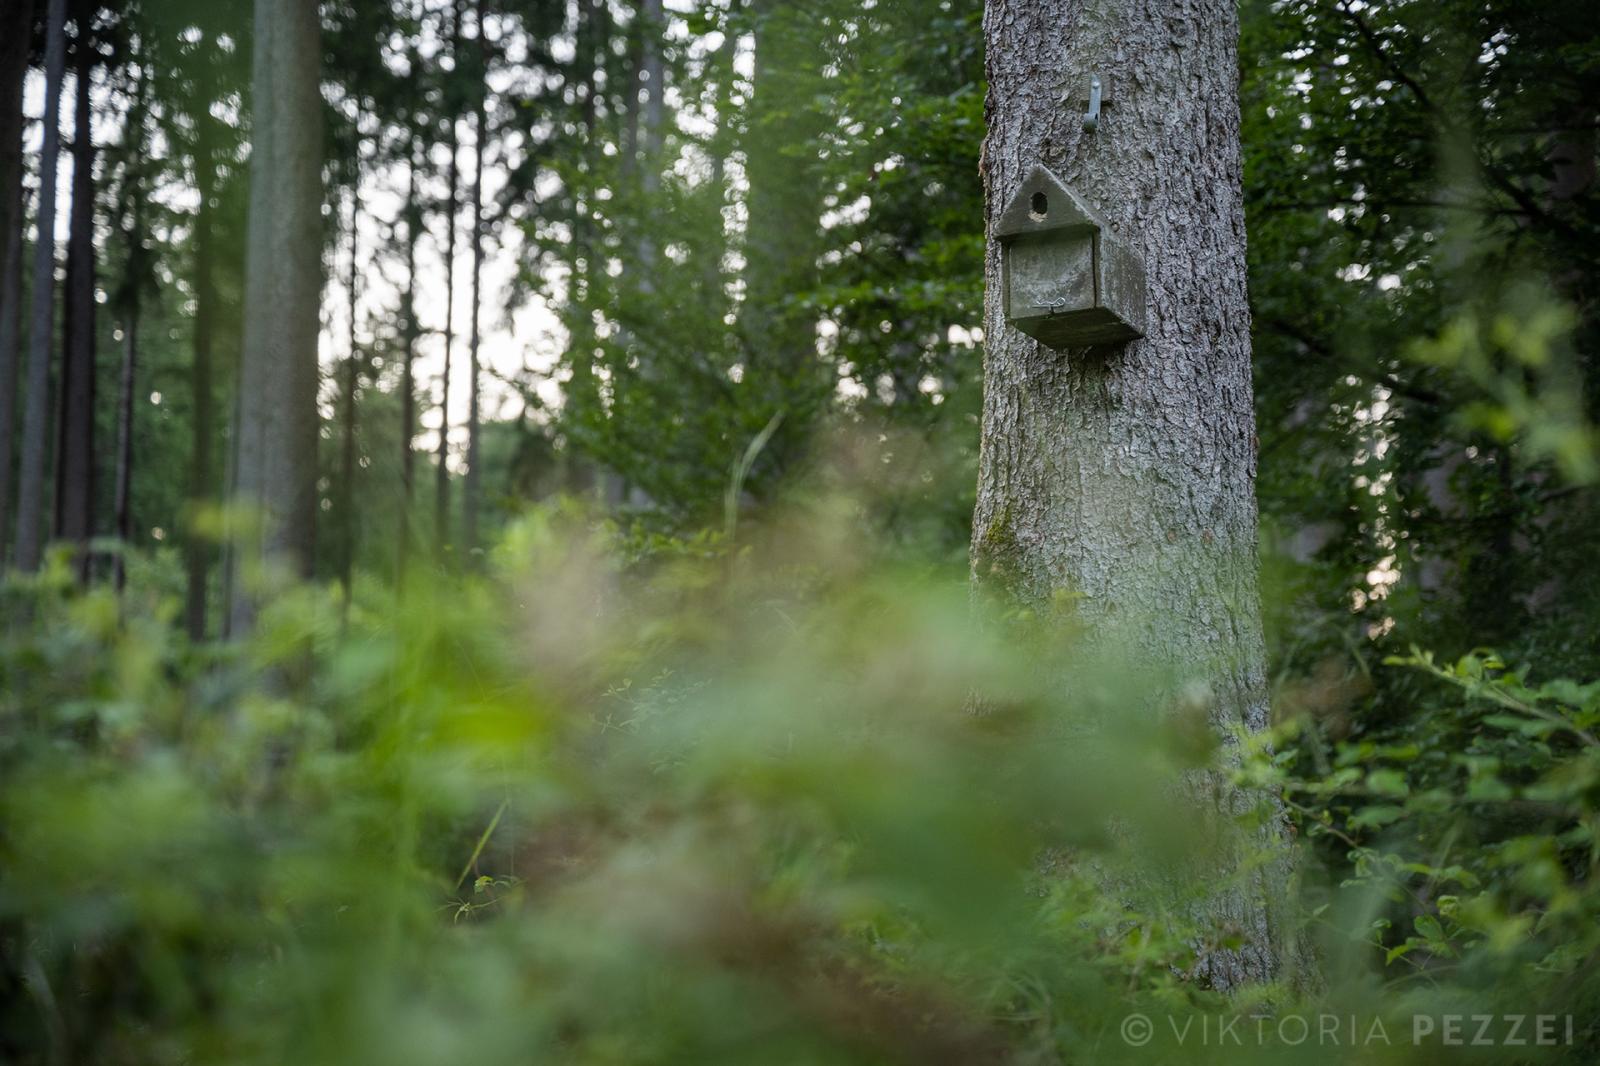 An installed bat box in the Ebersberger Forest.